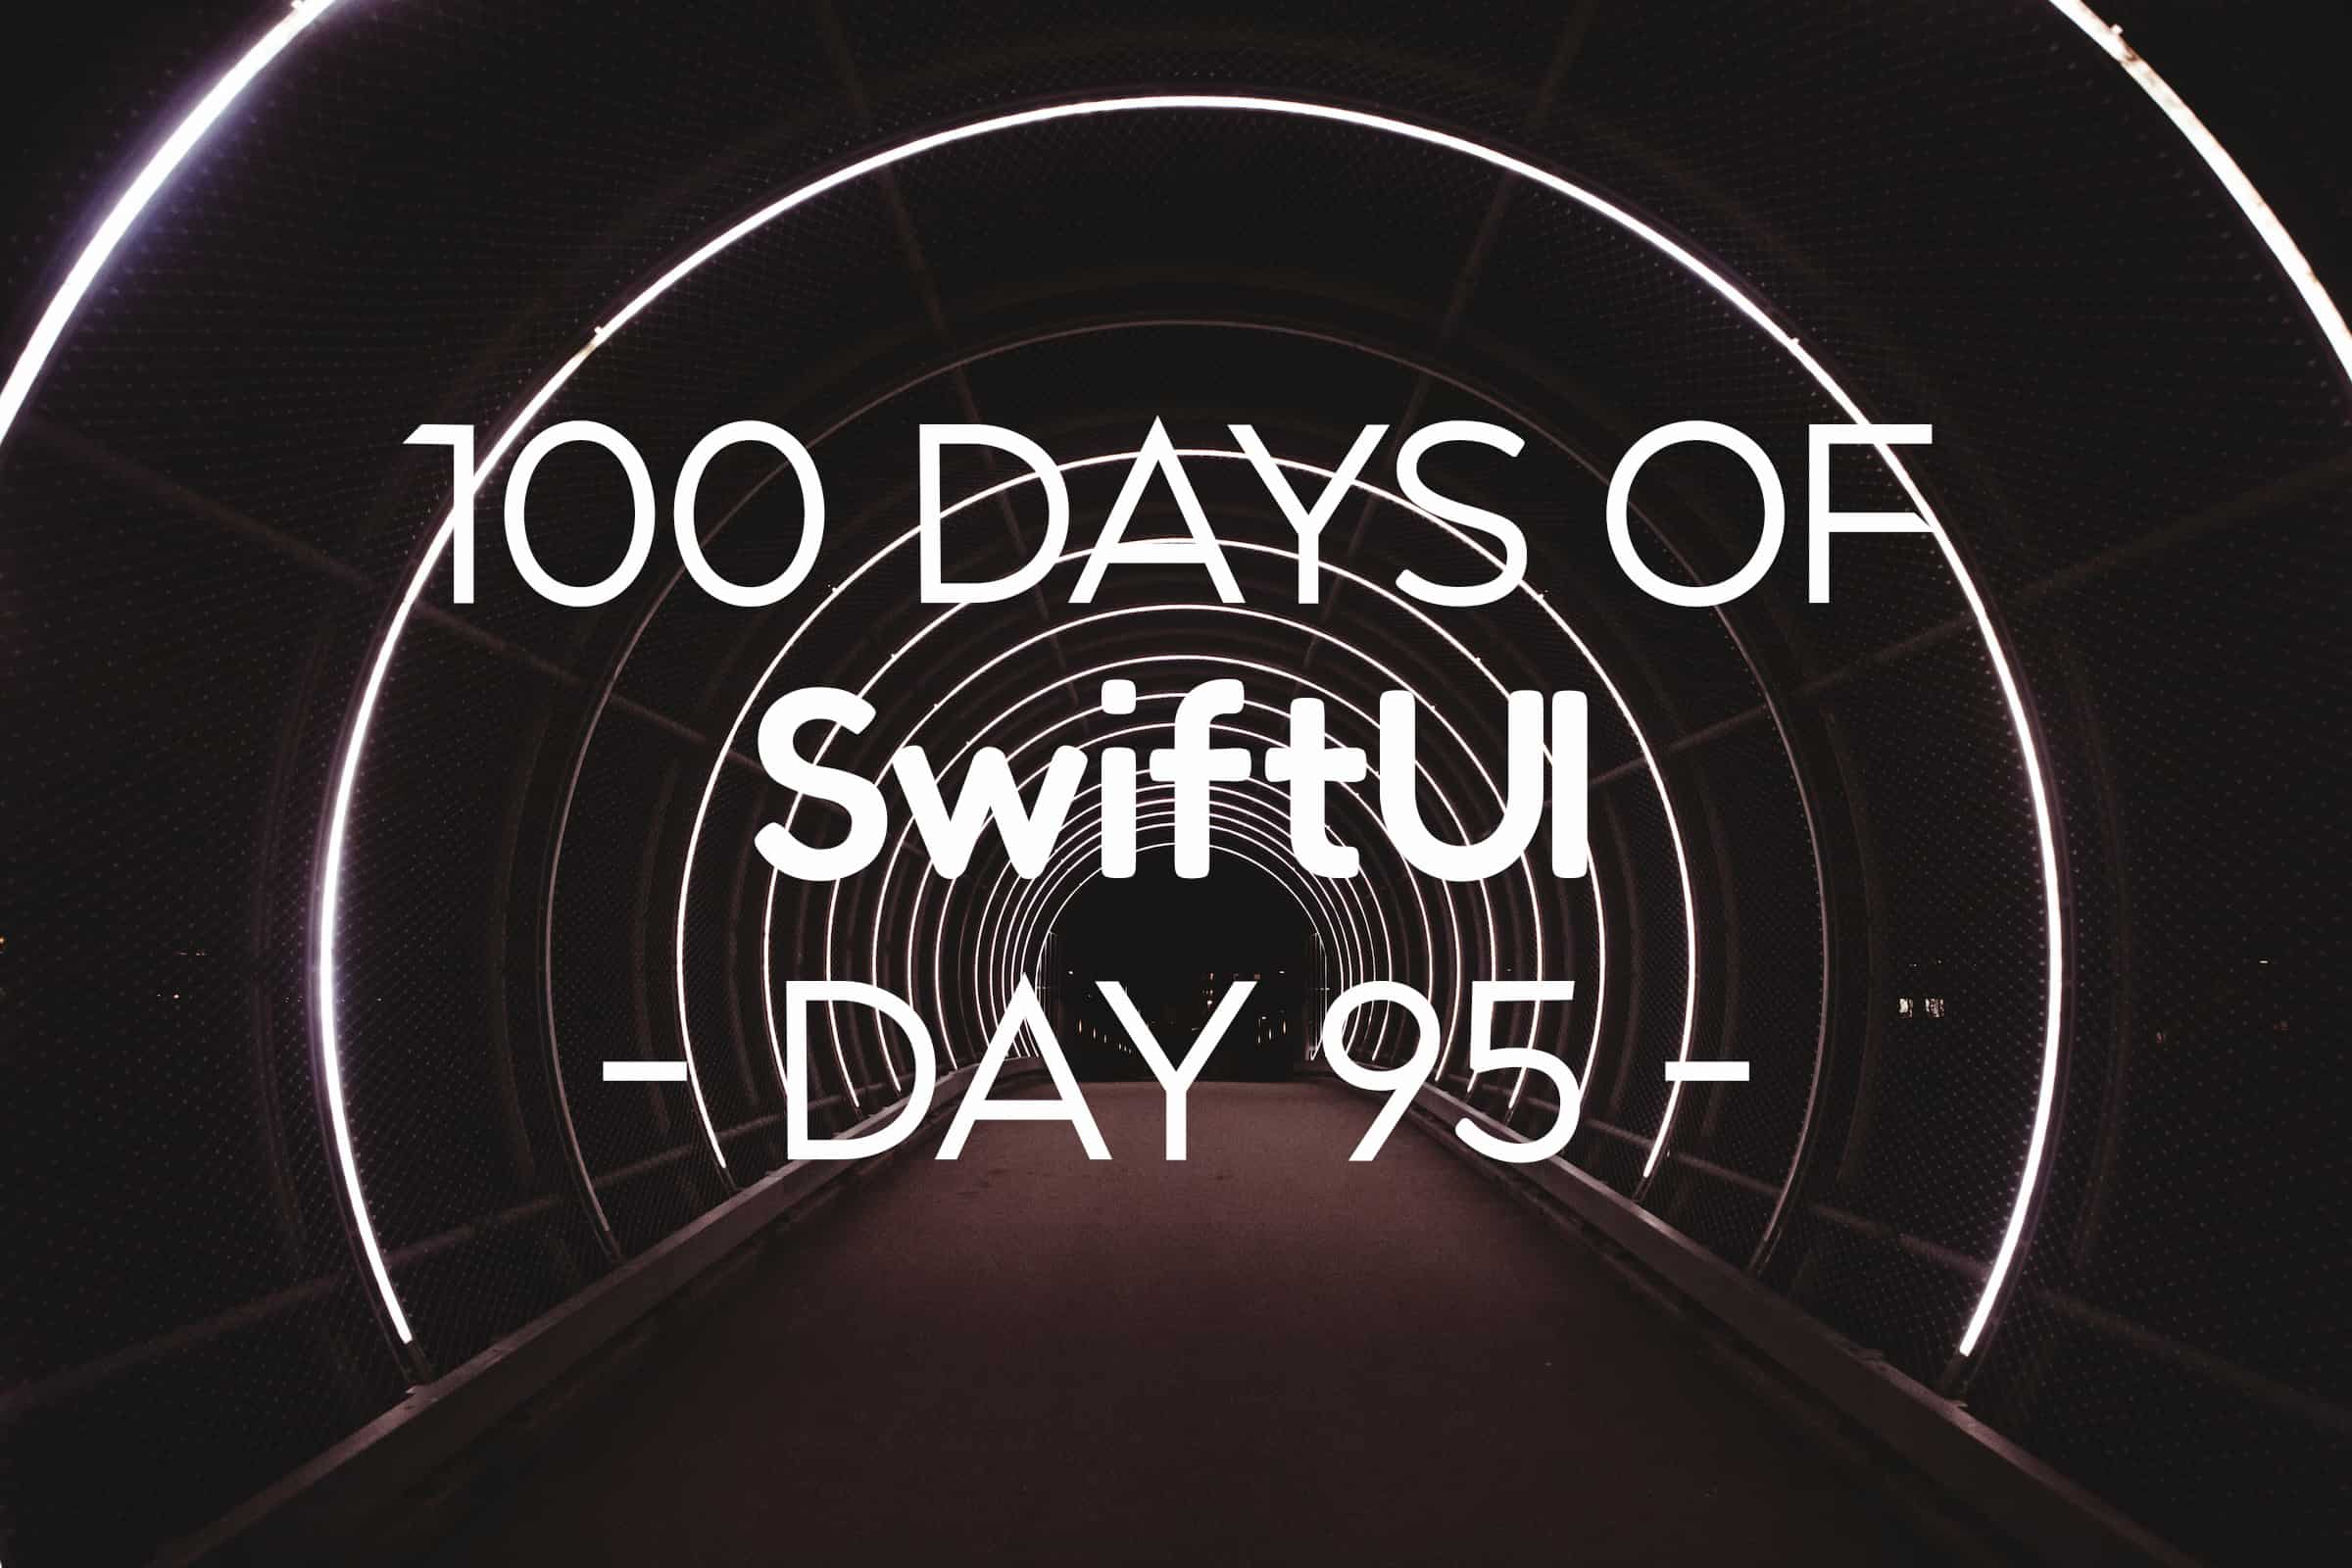 100 Days of SwiftUI Day 95